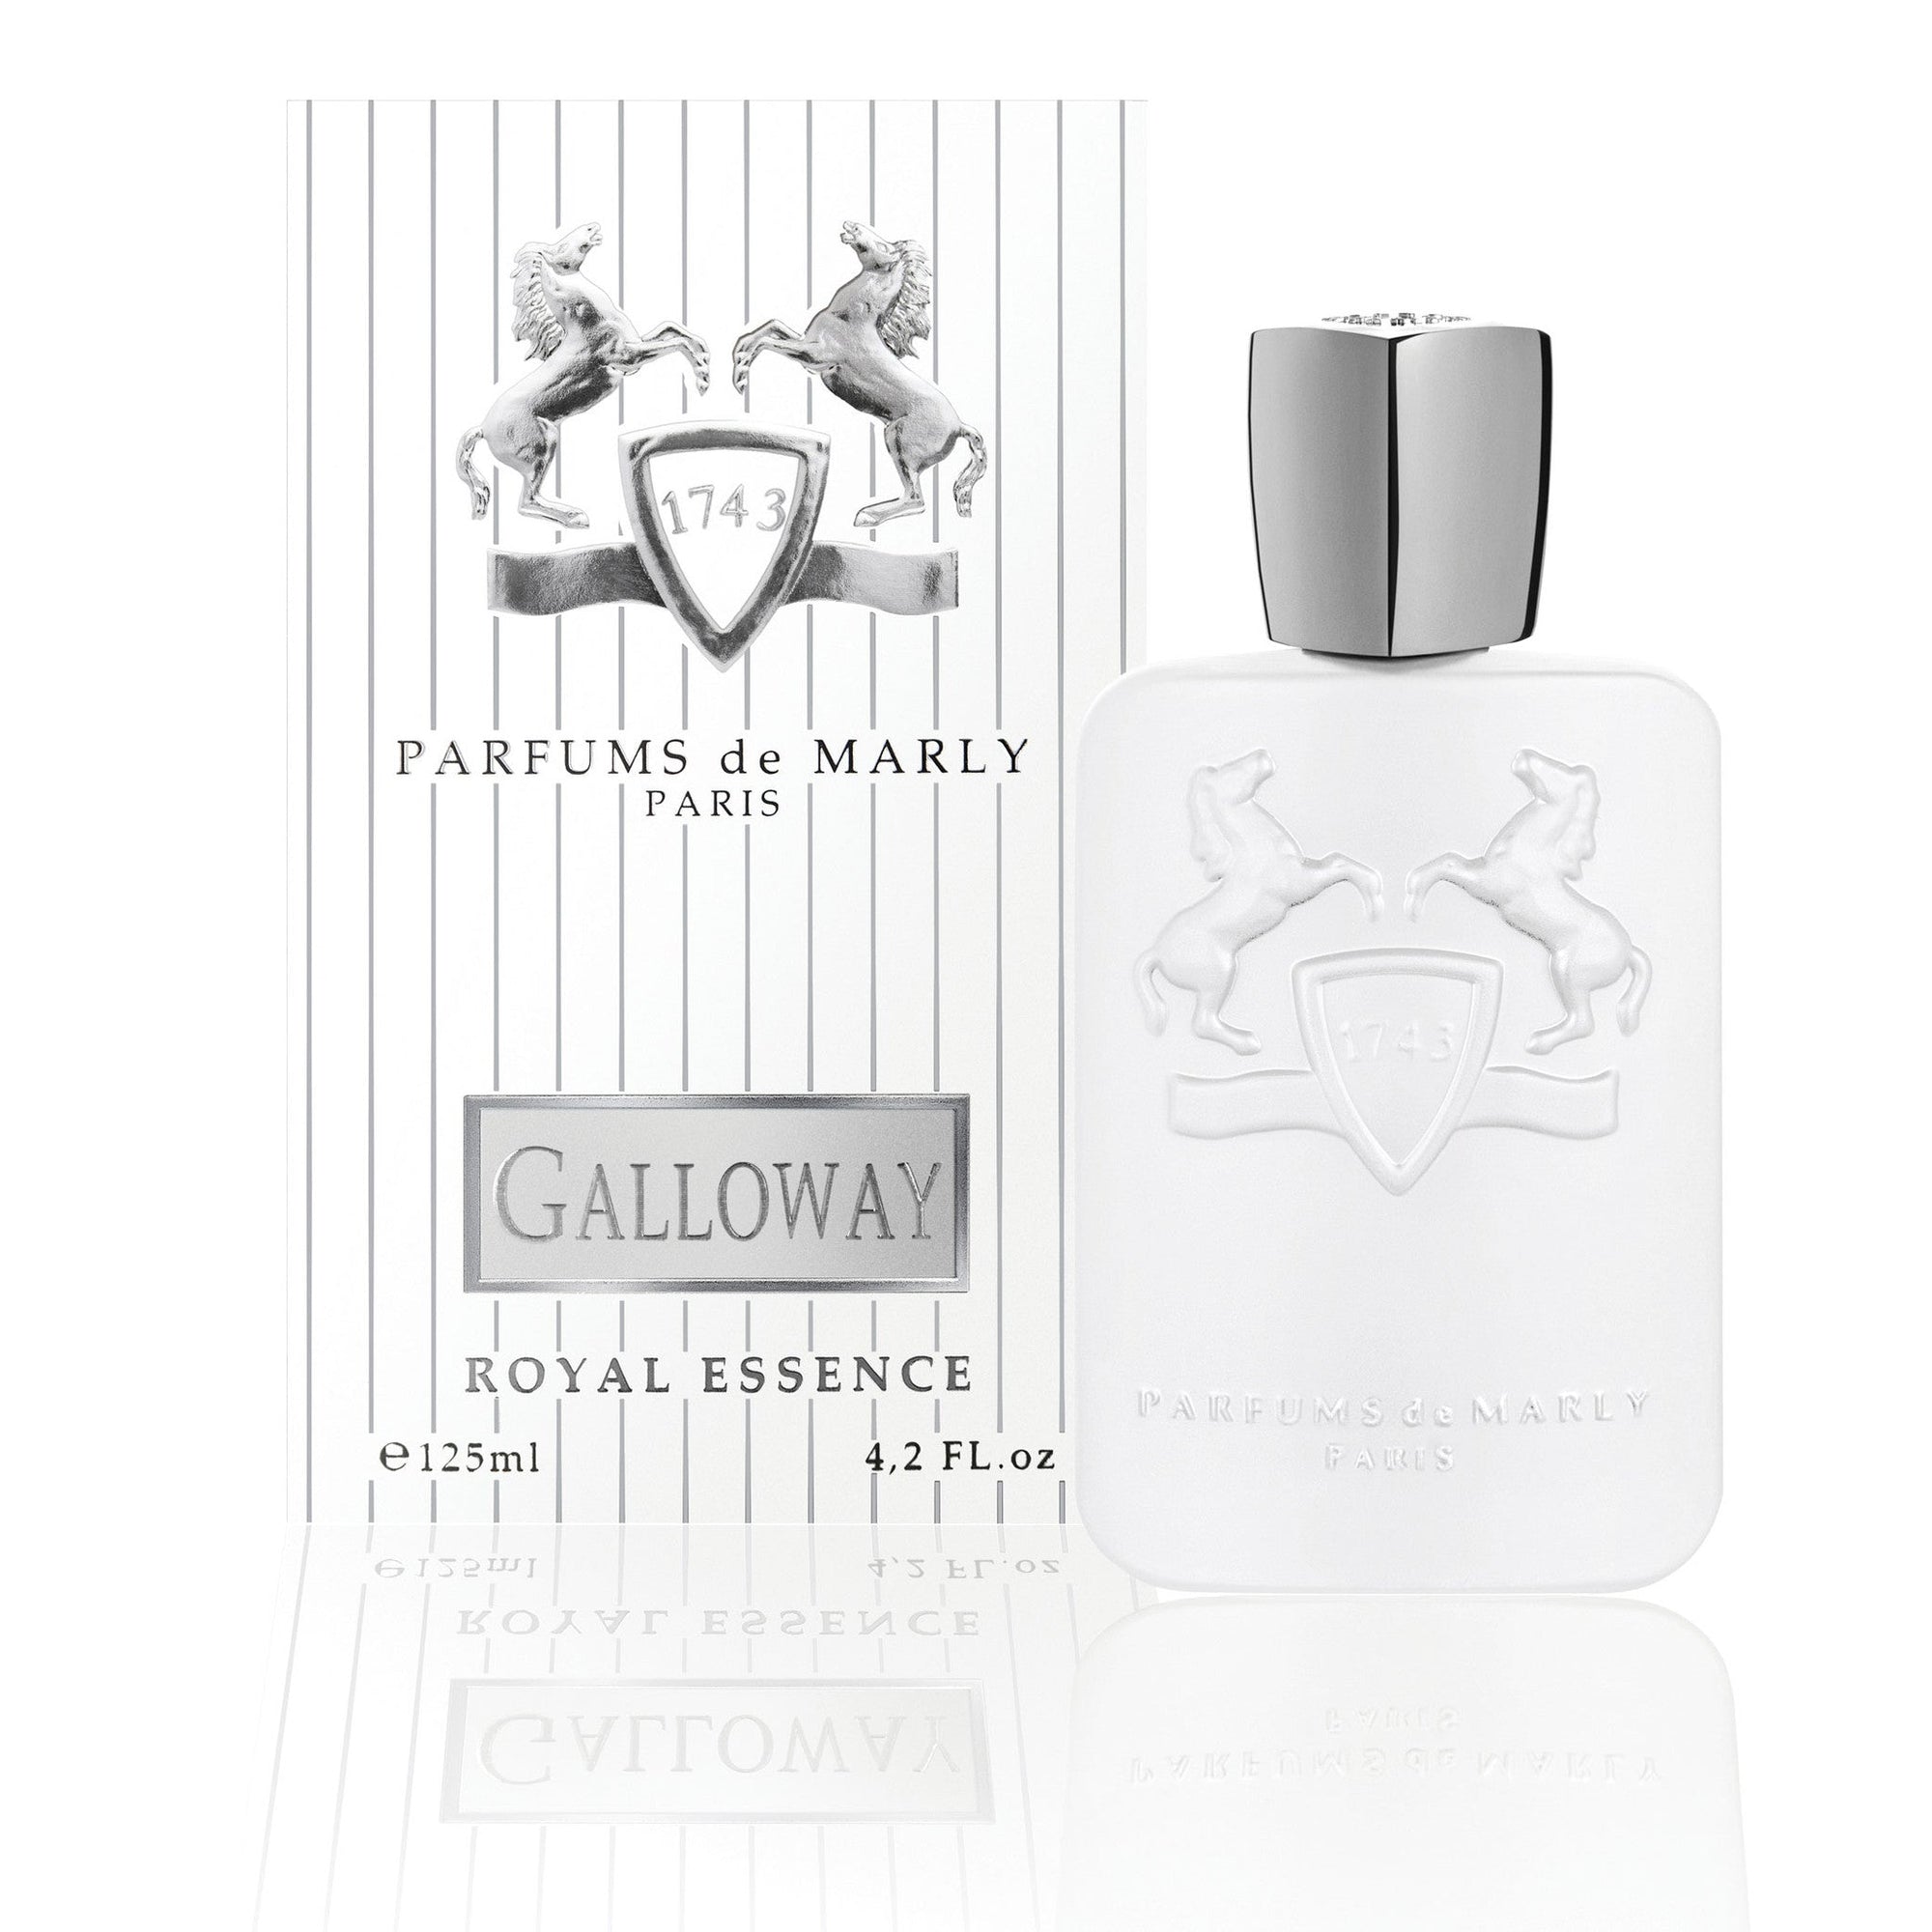 Parfums de Marly Galloway Royal Essence 125ml EDP Men - CURBSIDE PICKUP ONLY